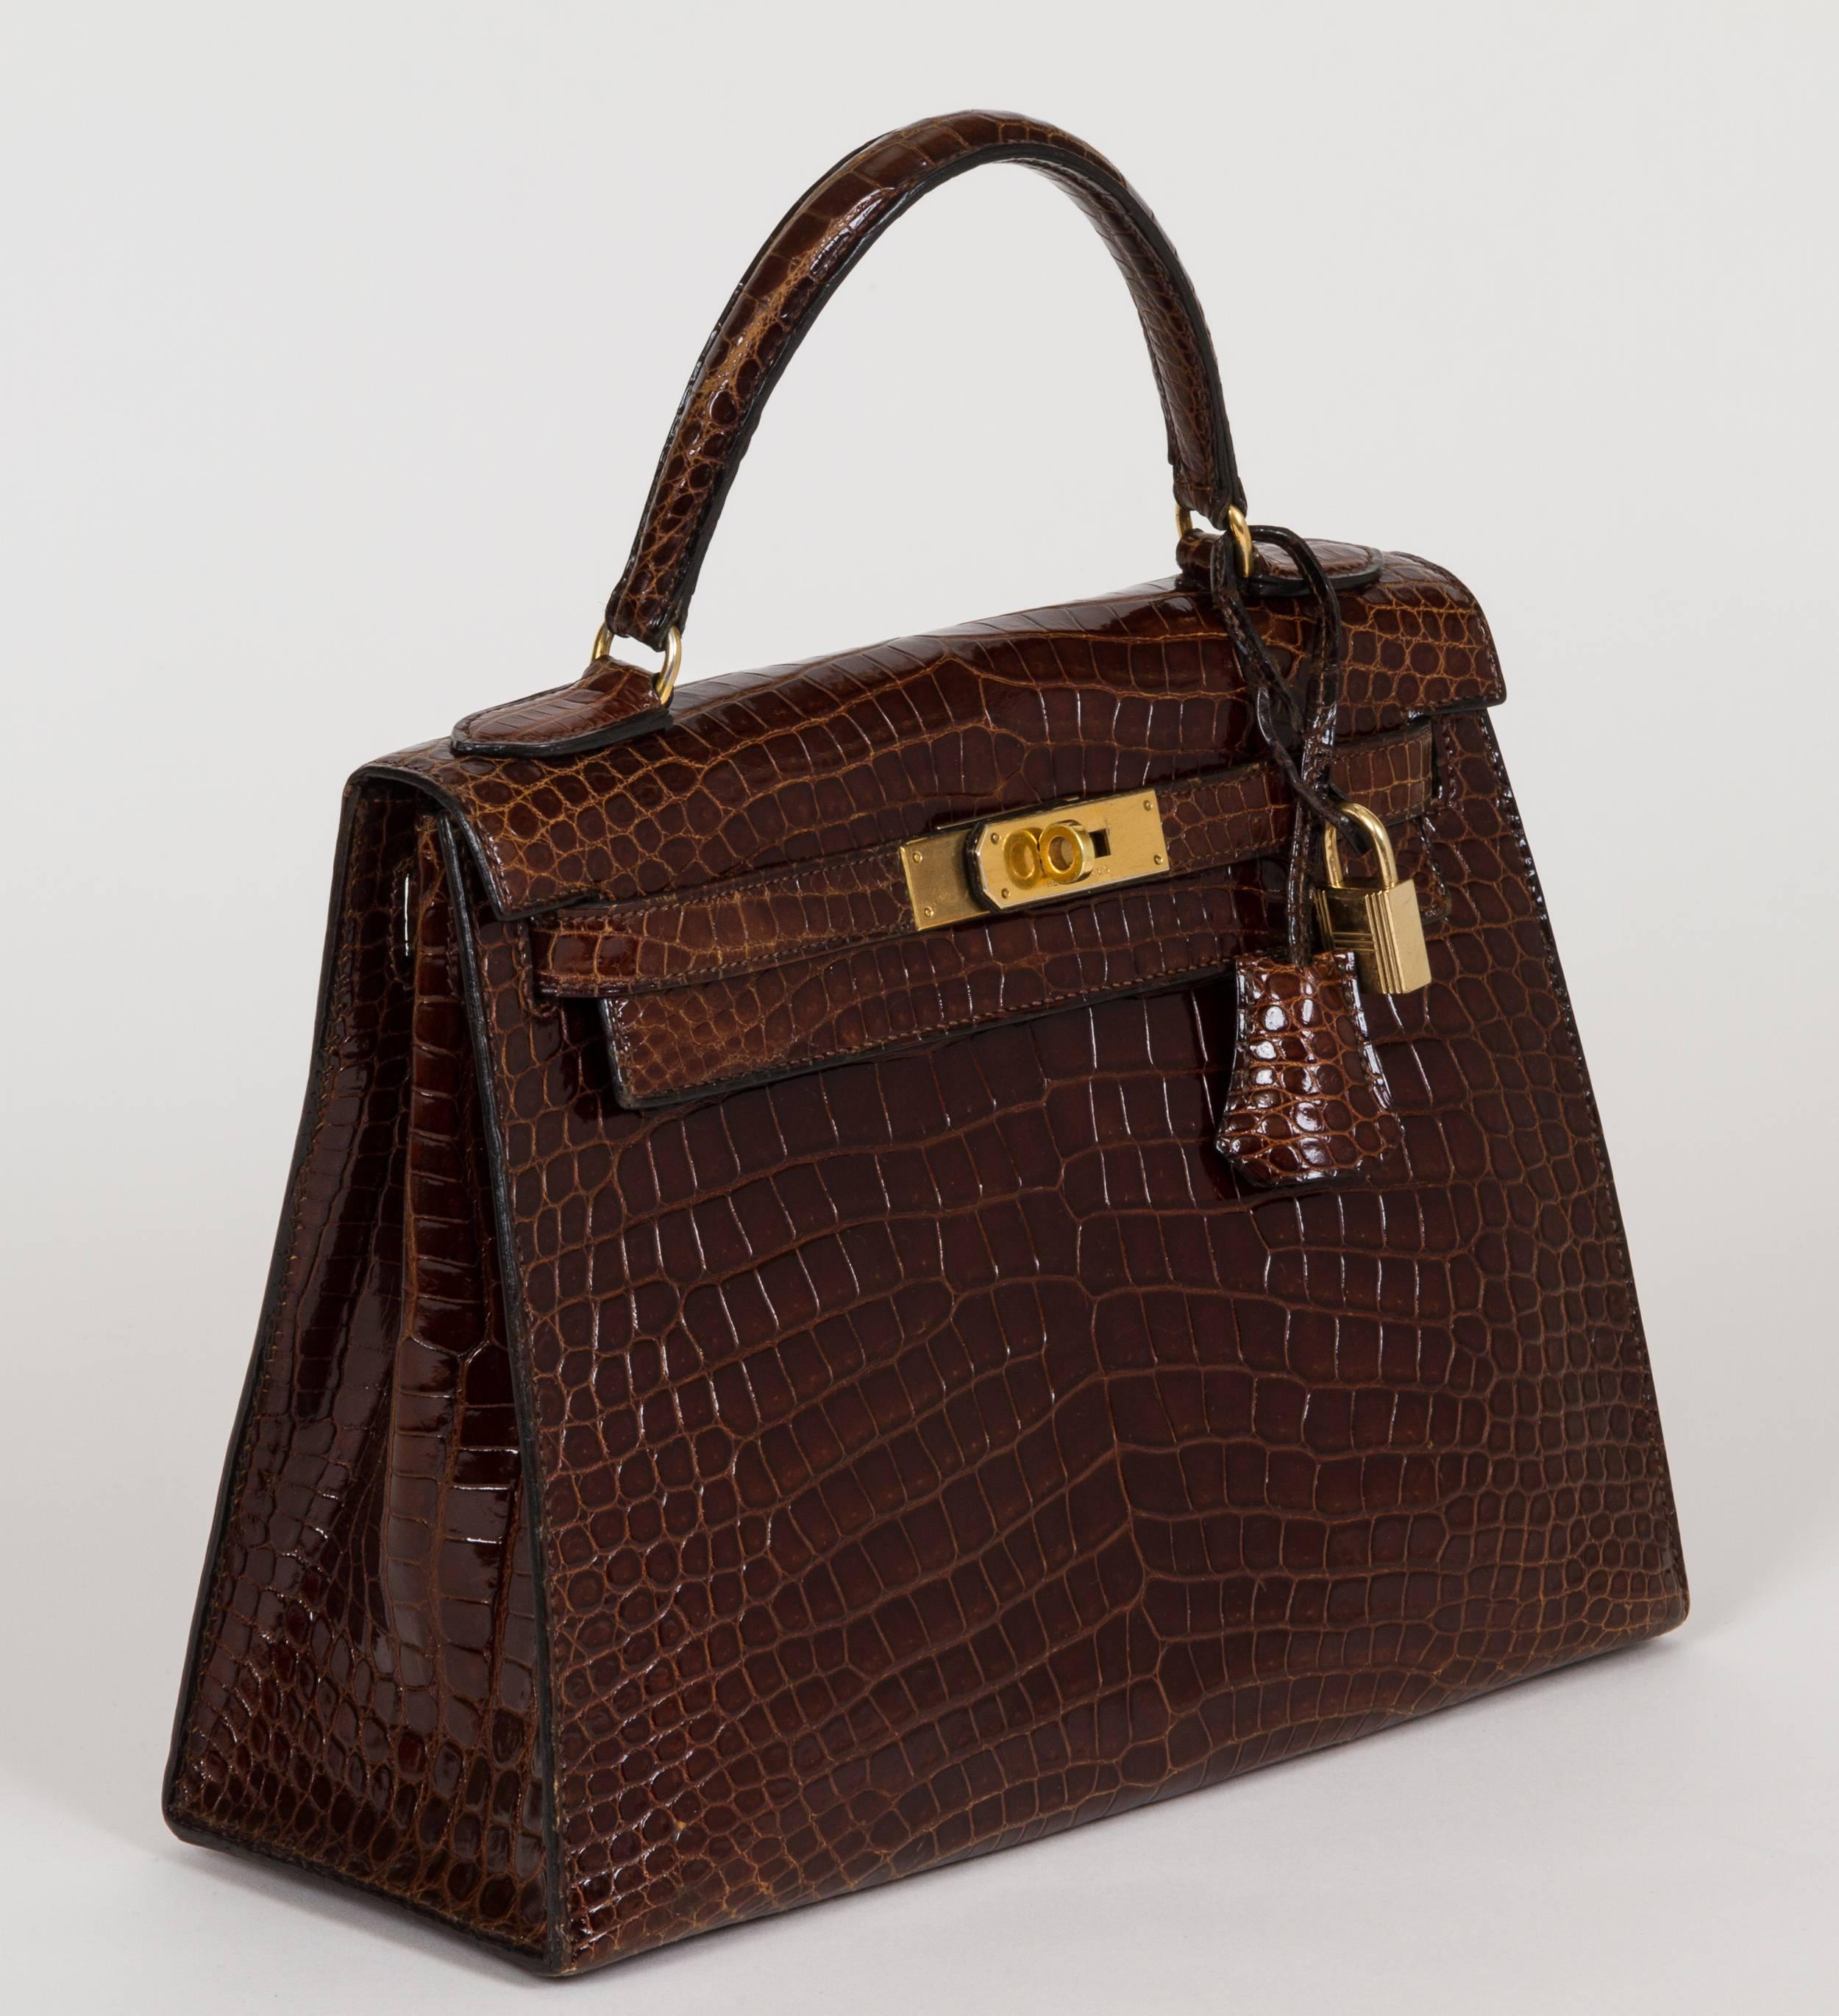 Hermès Kelly bag size 28cm (small size, perfect for evening wear). Miel brown crocodile leather and goldtone hardware. Blind stamp 